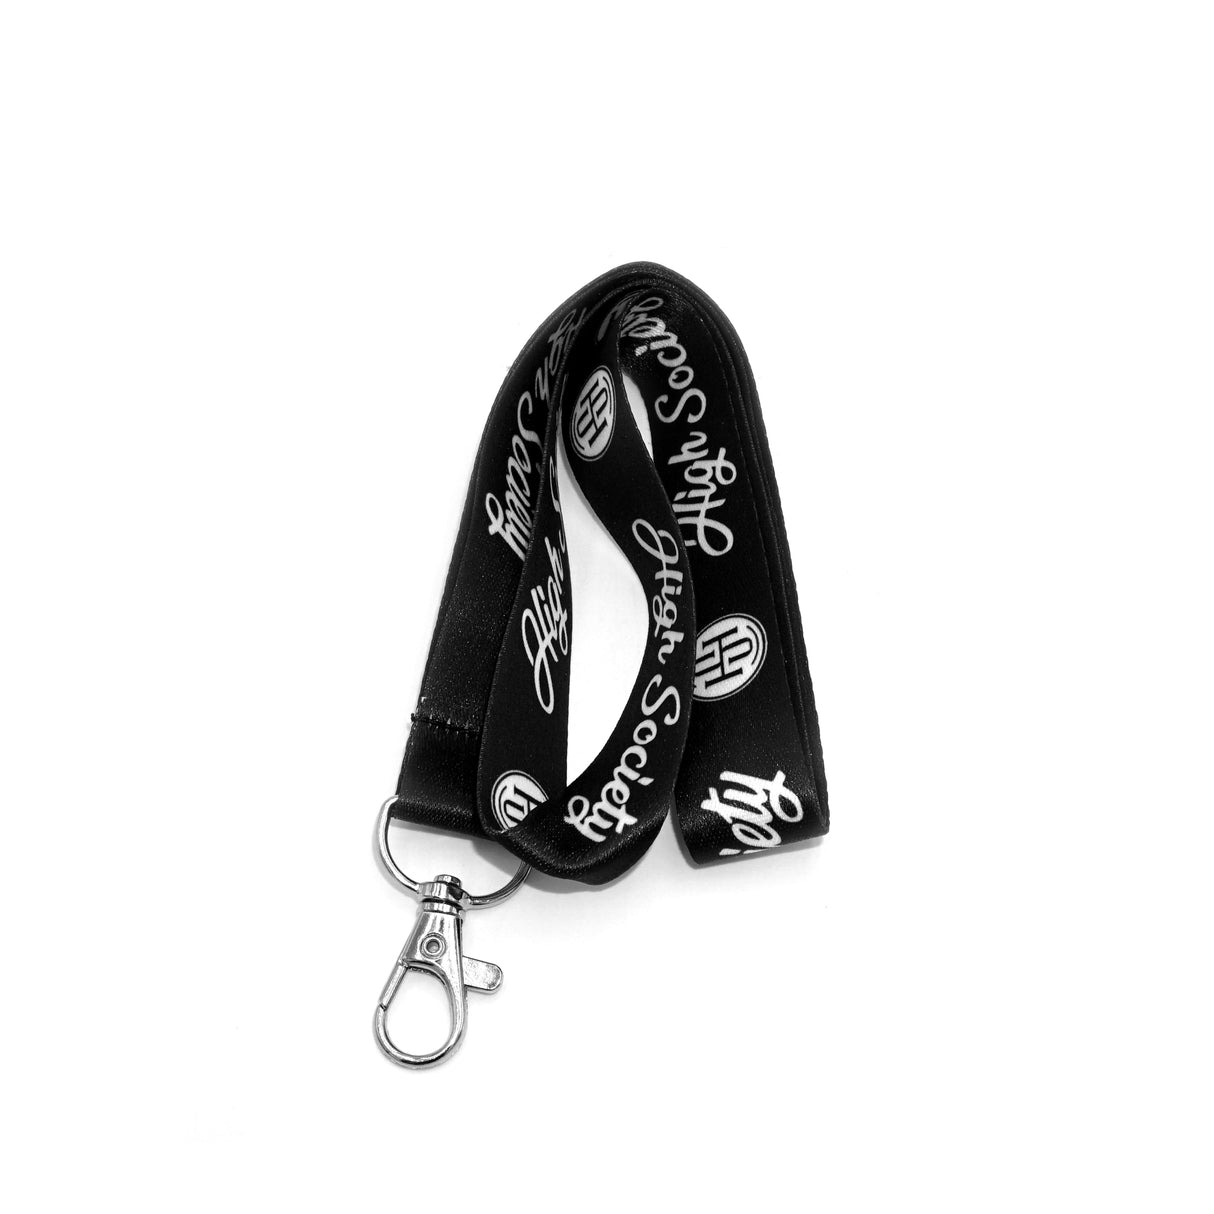 High Society Limited Edition Black Lanyard with White Logo, Front View, with Metal Clasp